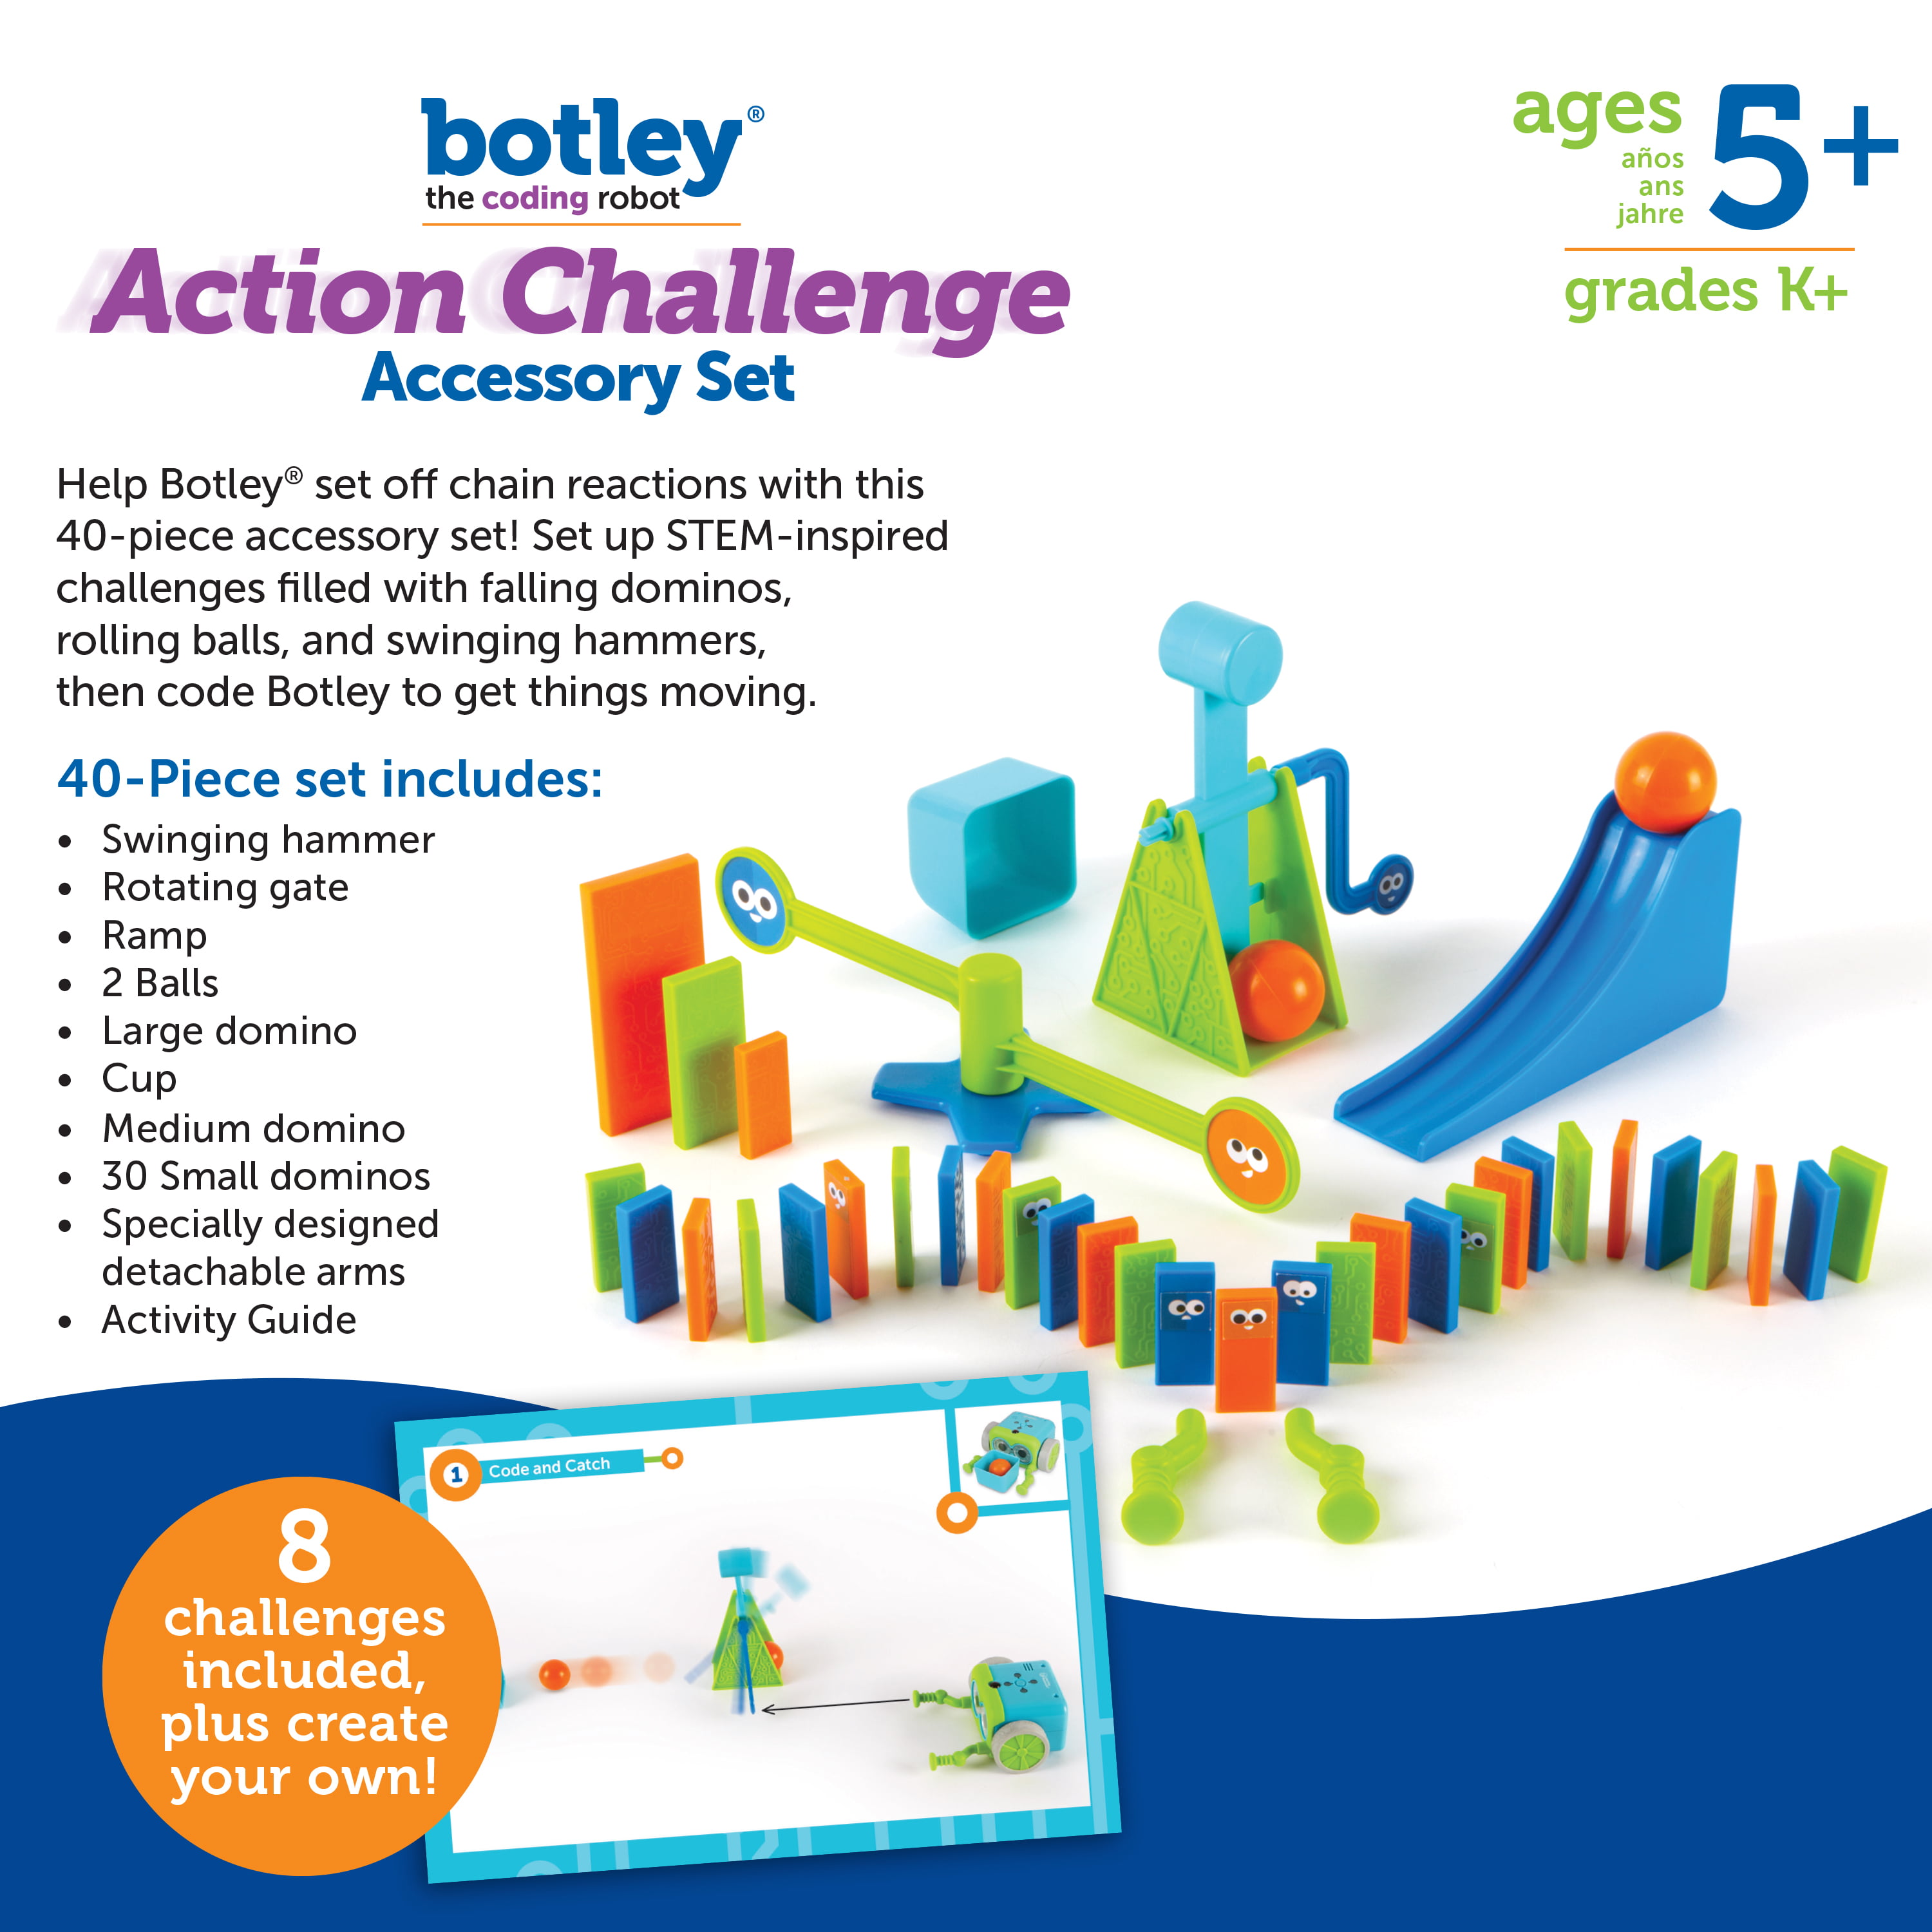 Botley® Coding Robot Obstacle Course, Cards and Tiles - 77 Pieces